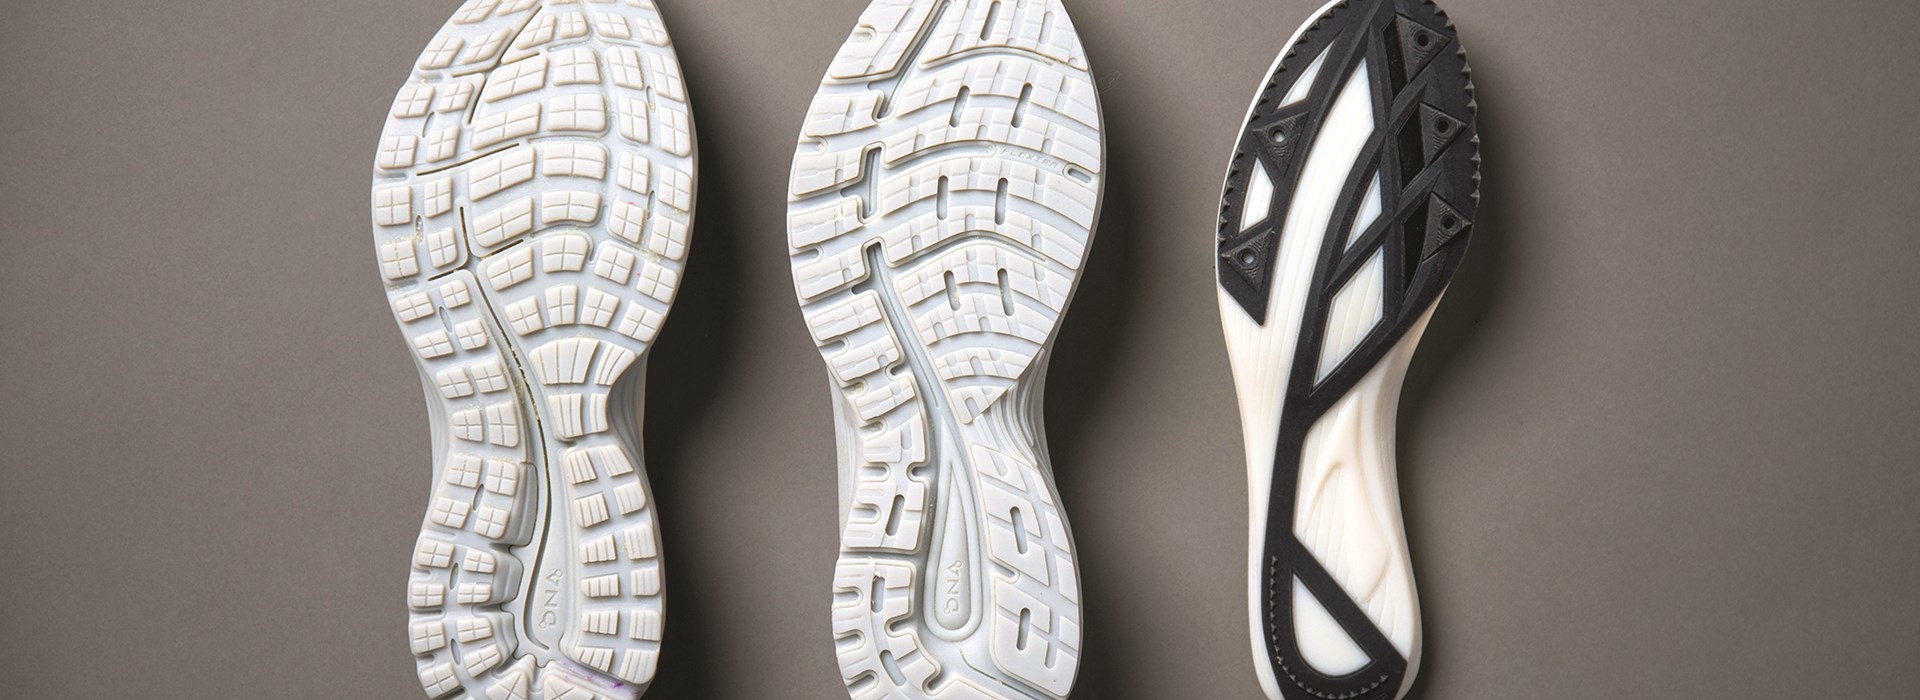 Brooks’ 3D printed midsole and outsole prototypes